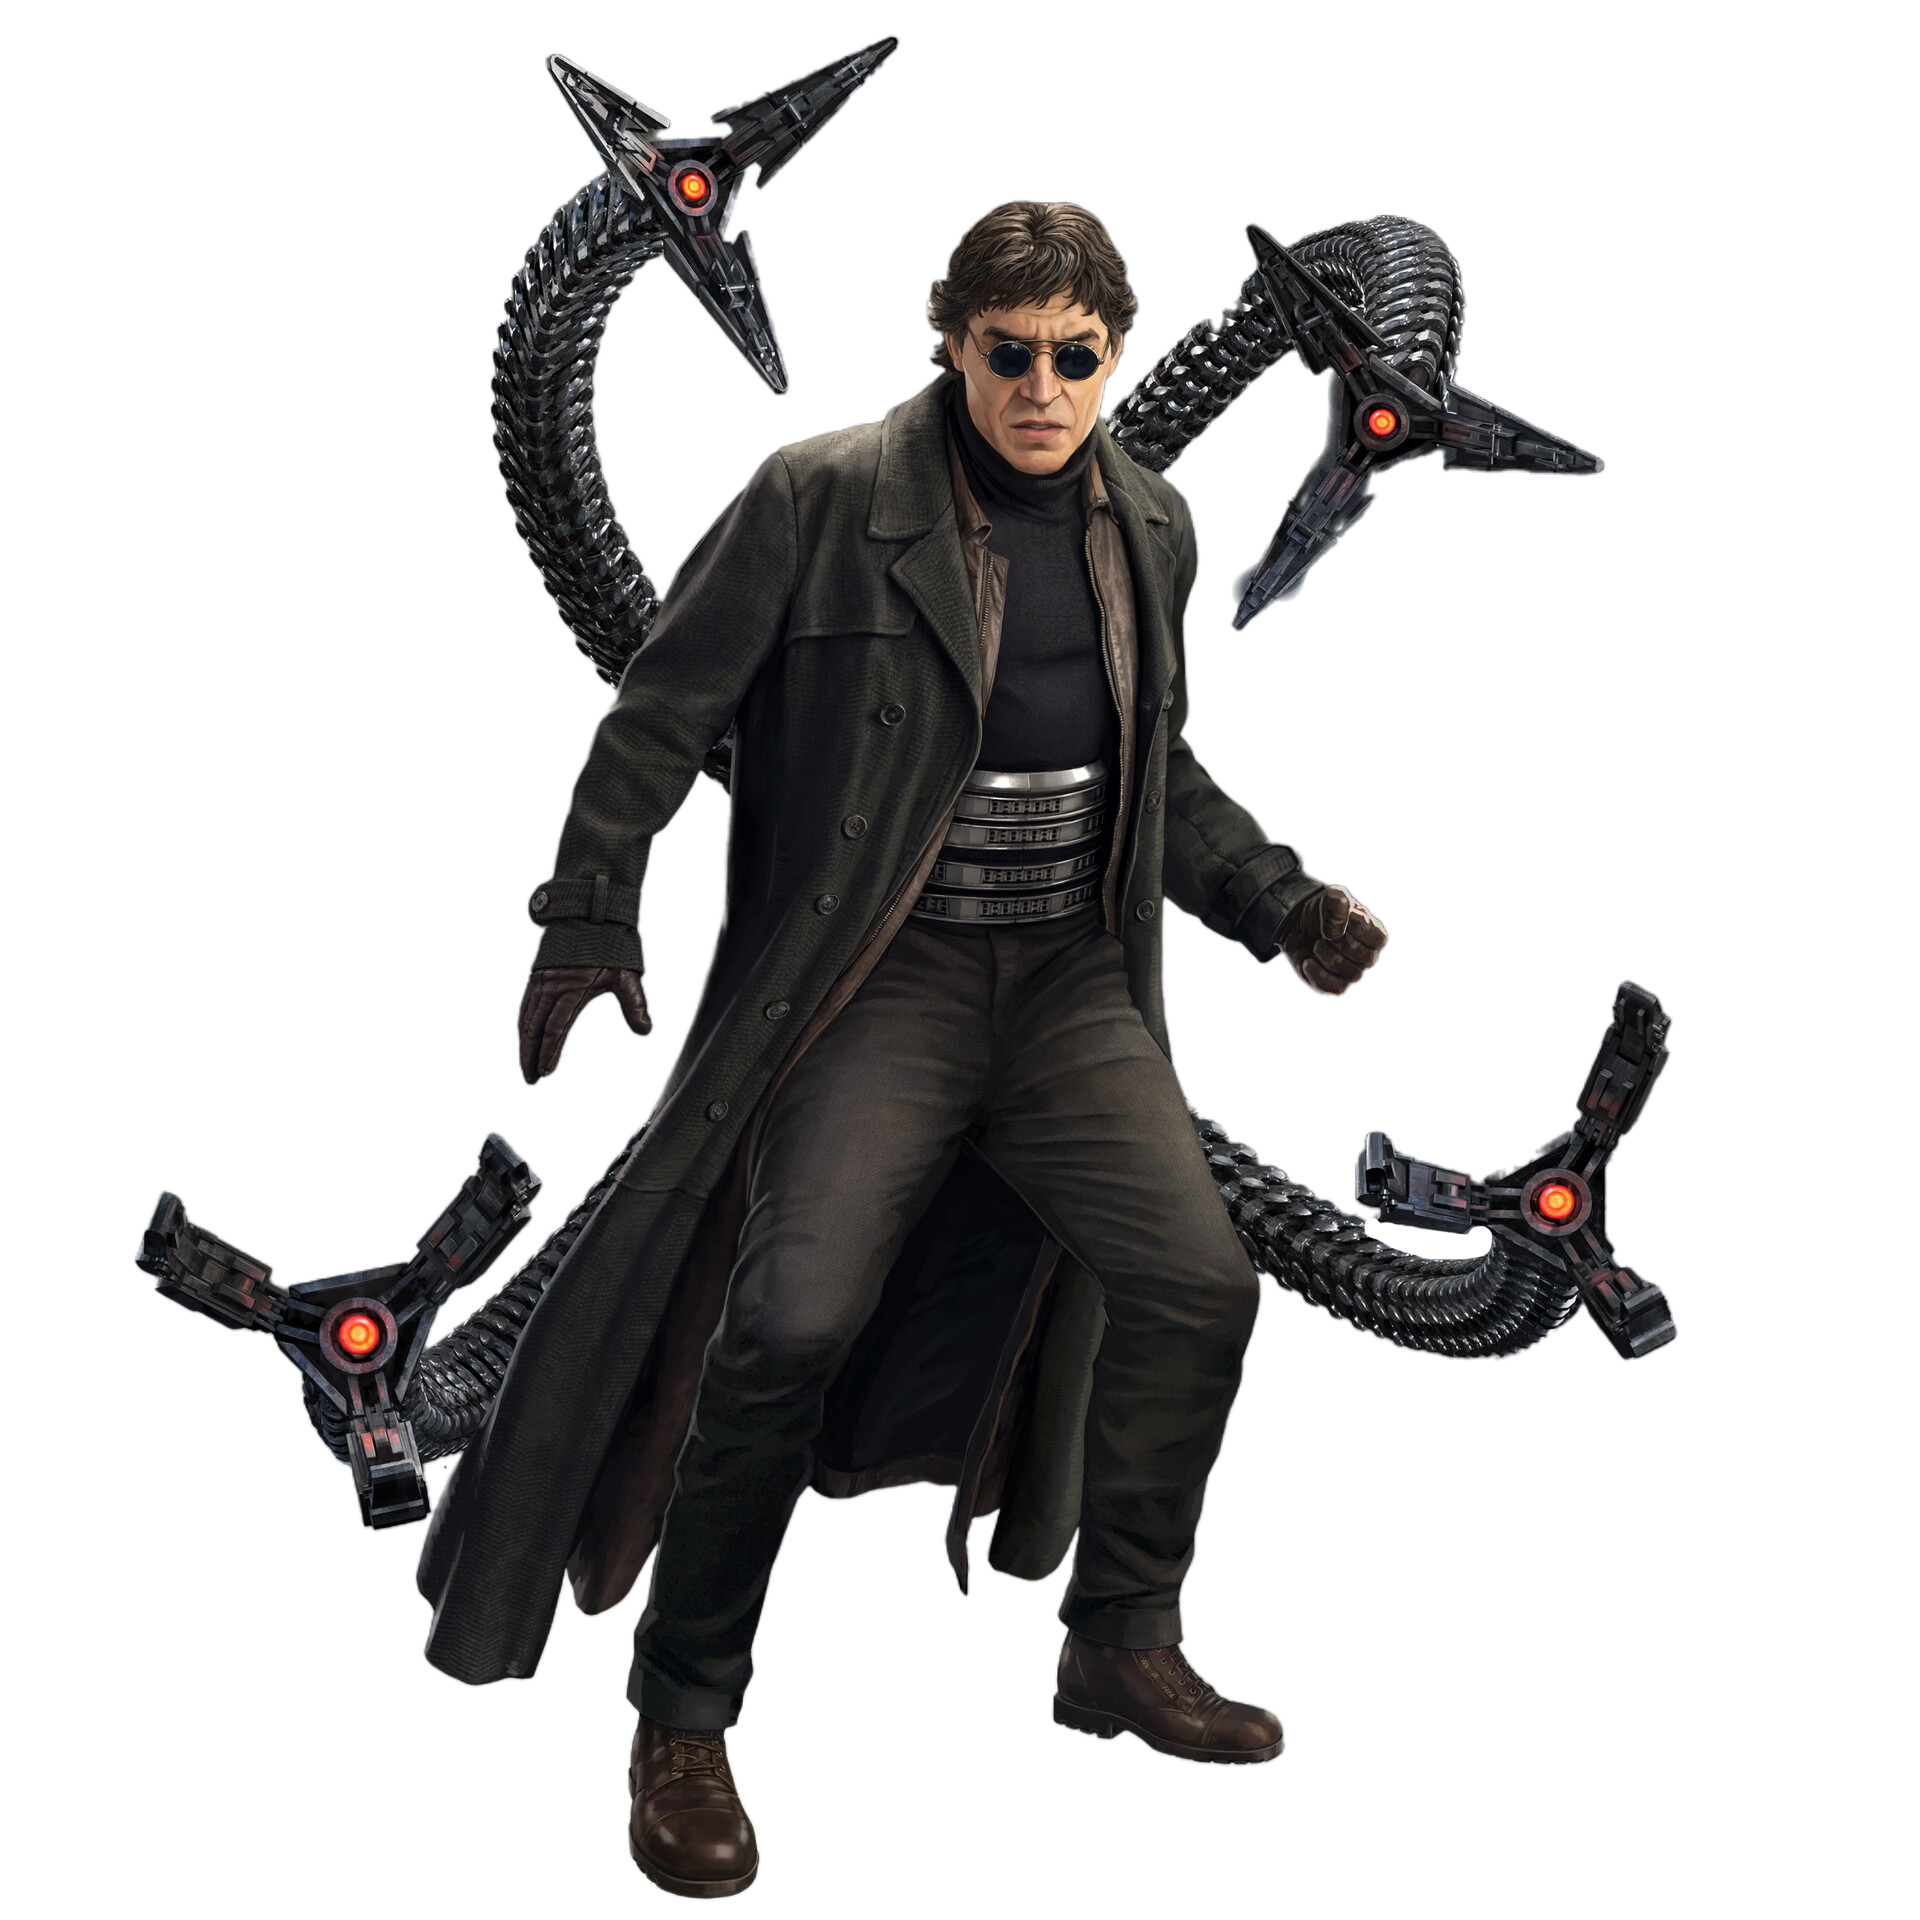 Doctor Octopus (No Way Home) - PNG (2) by DHV123 on DeviantArt